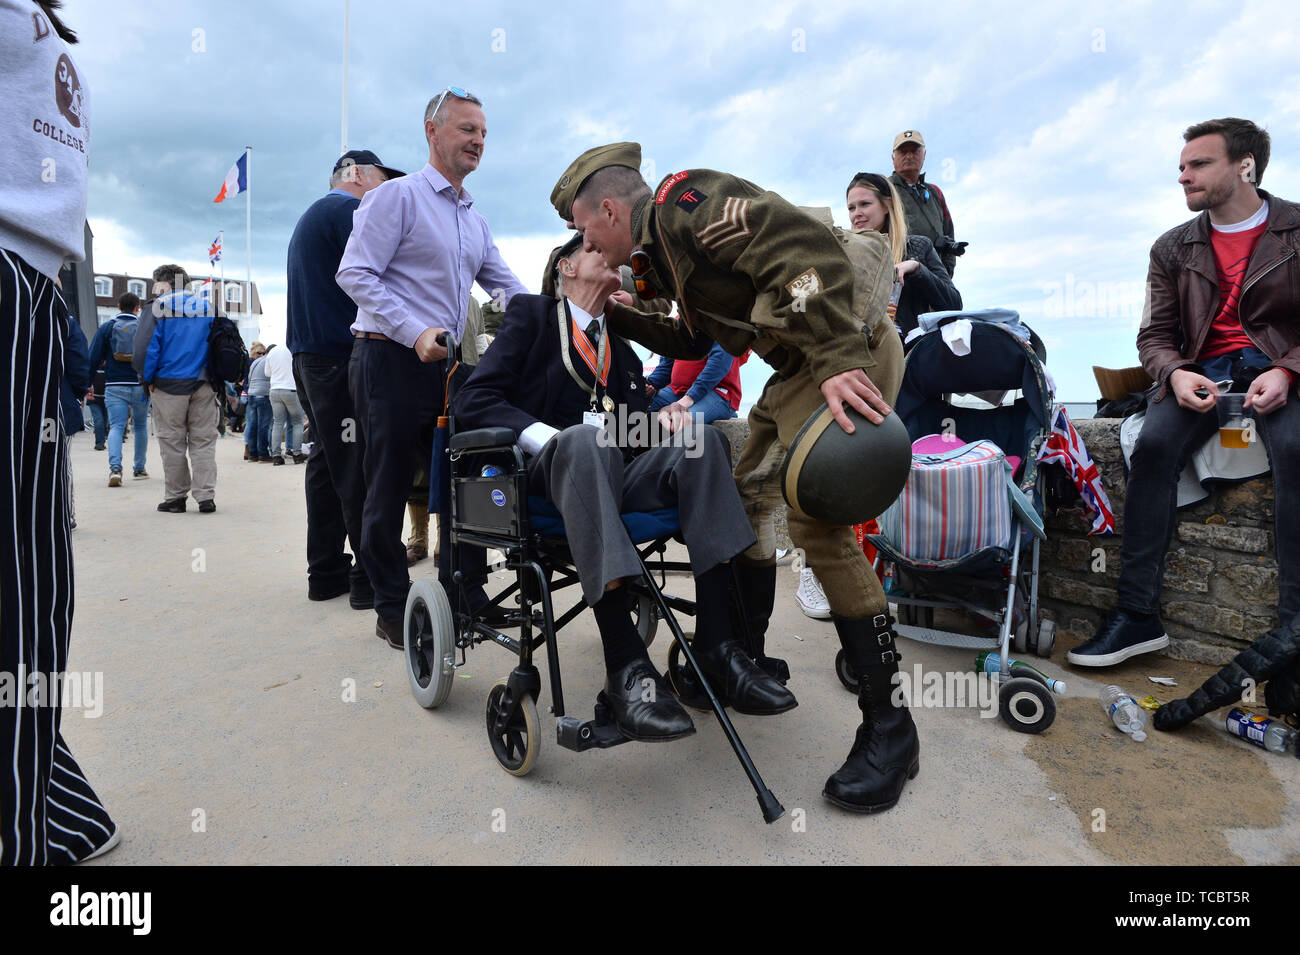 A French actor in military dress says goodbye to one of the war veterans after a ceremony in Arromanches in Normandy, northern France, during commemorations for the 75th anniversary of the D-Day landings. Stock Photo